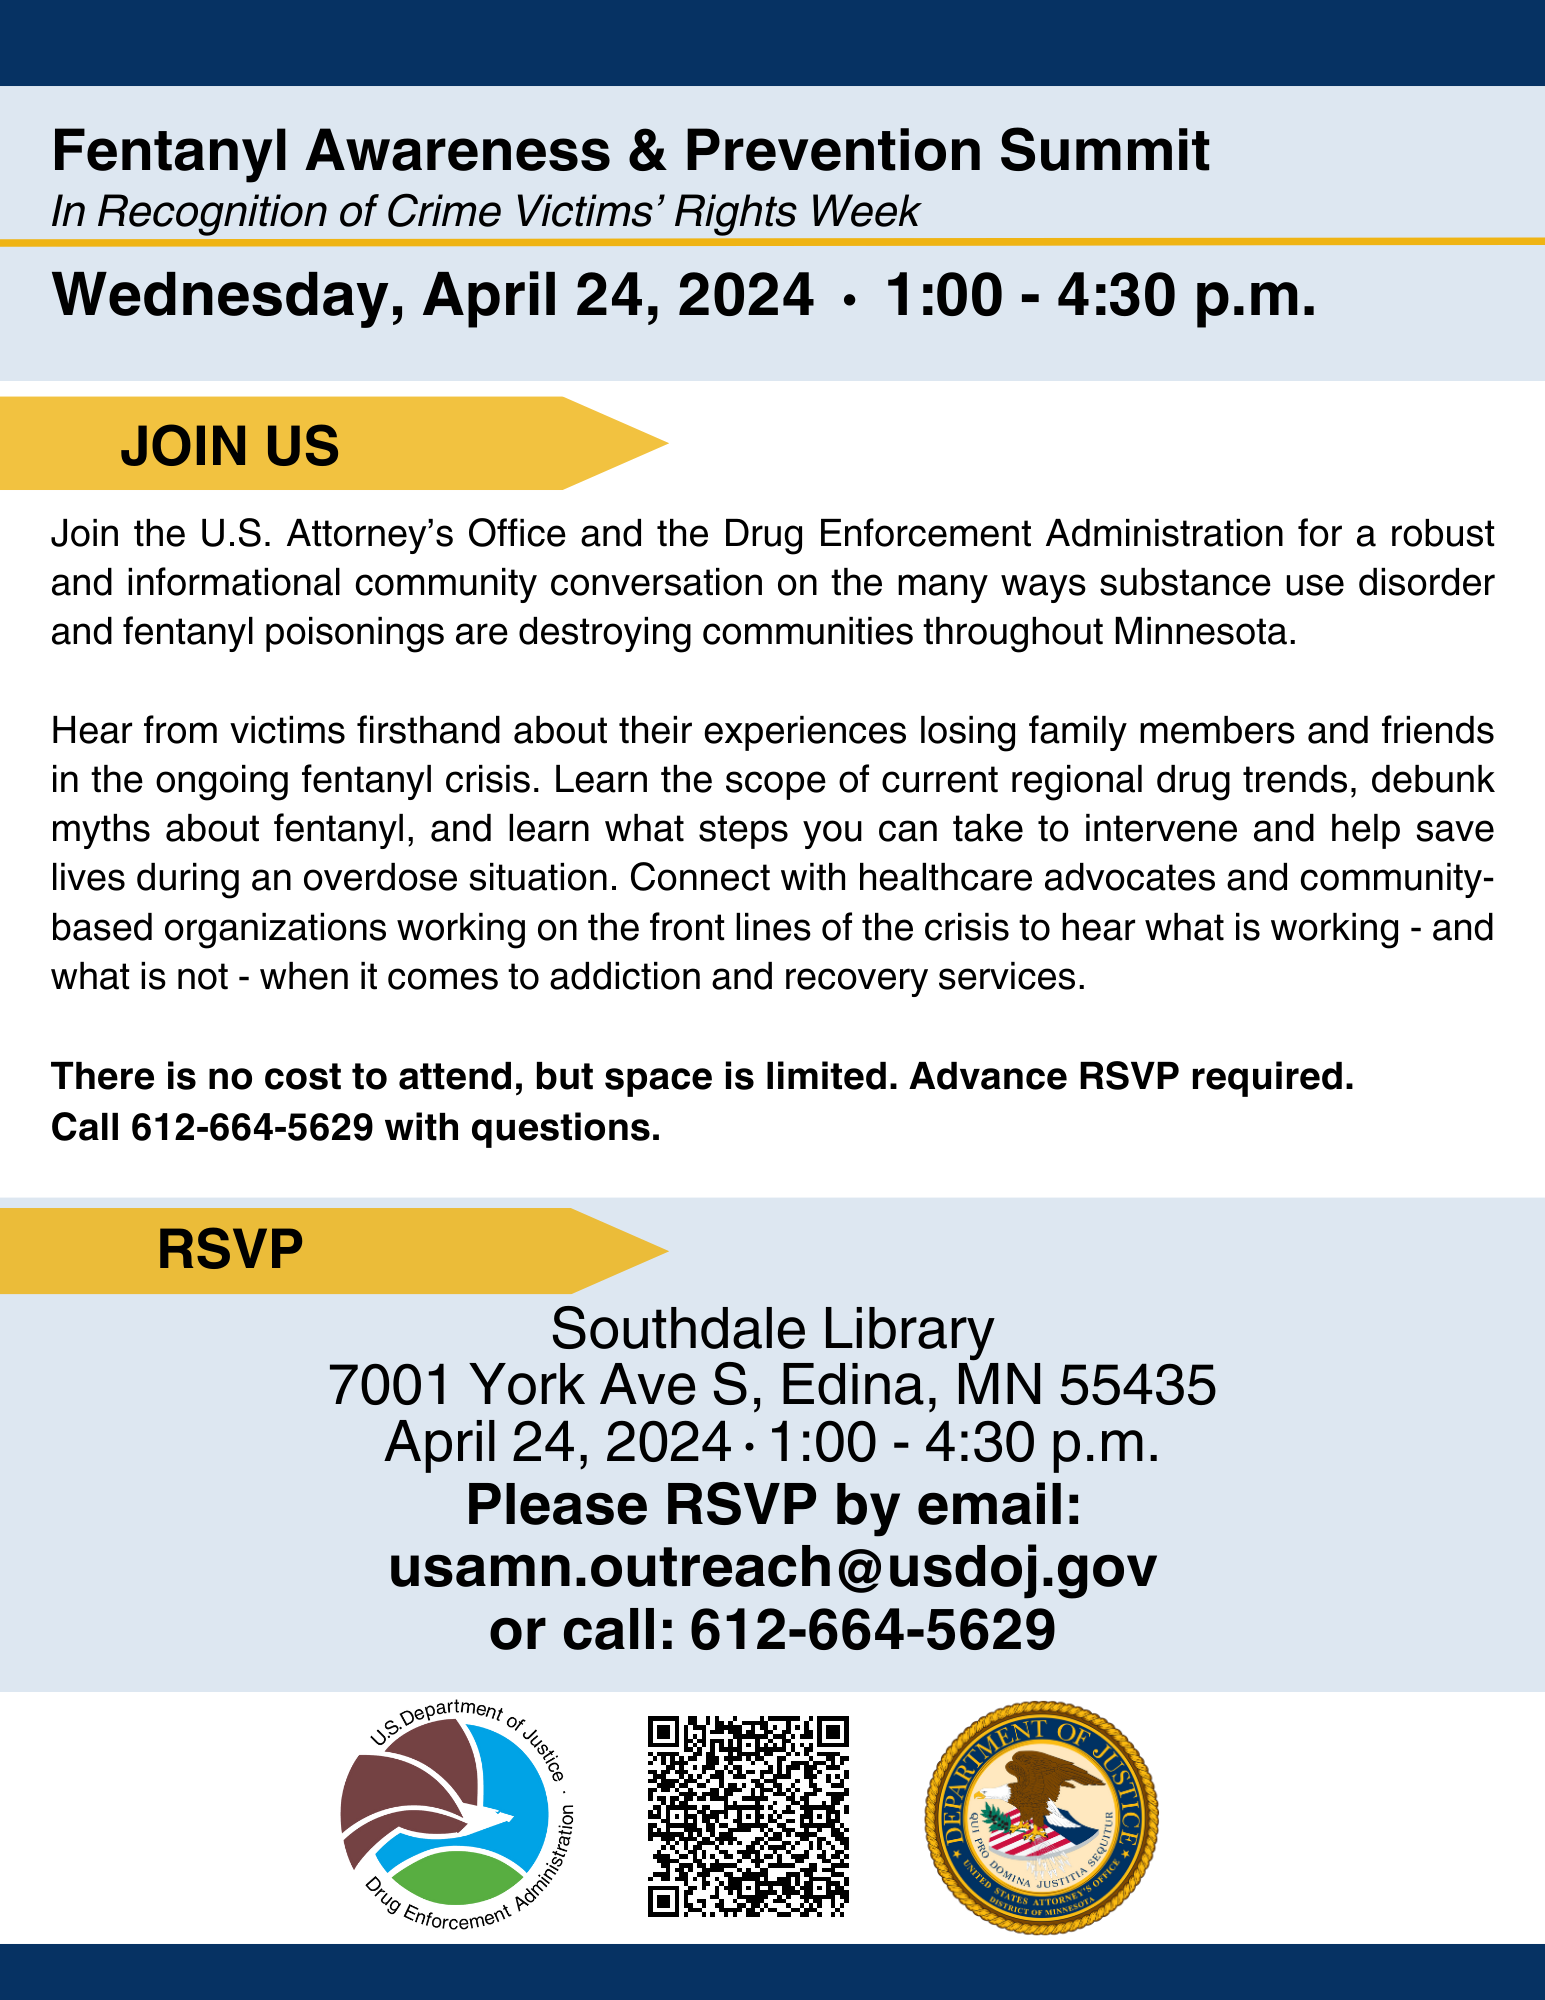 Join the Department of Justice for an informational community conversation on the many ways fentanyl is destroying communities throughout Minnesota.